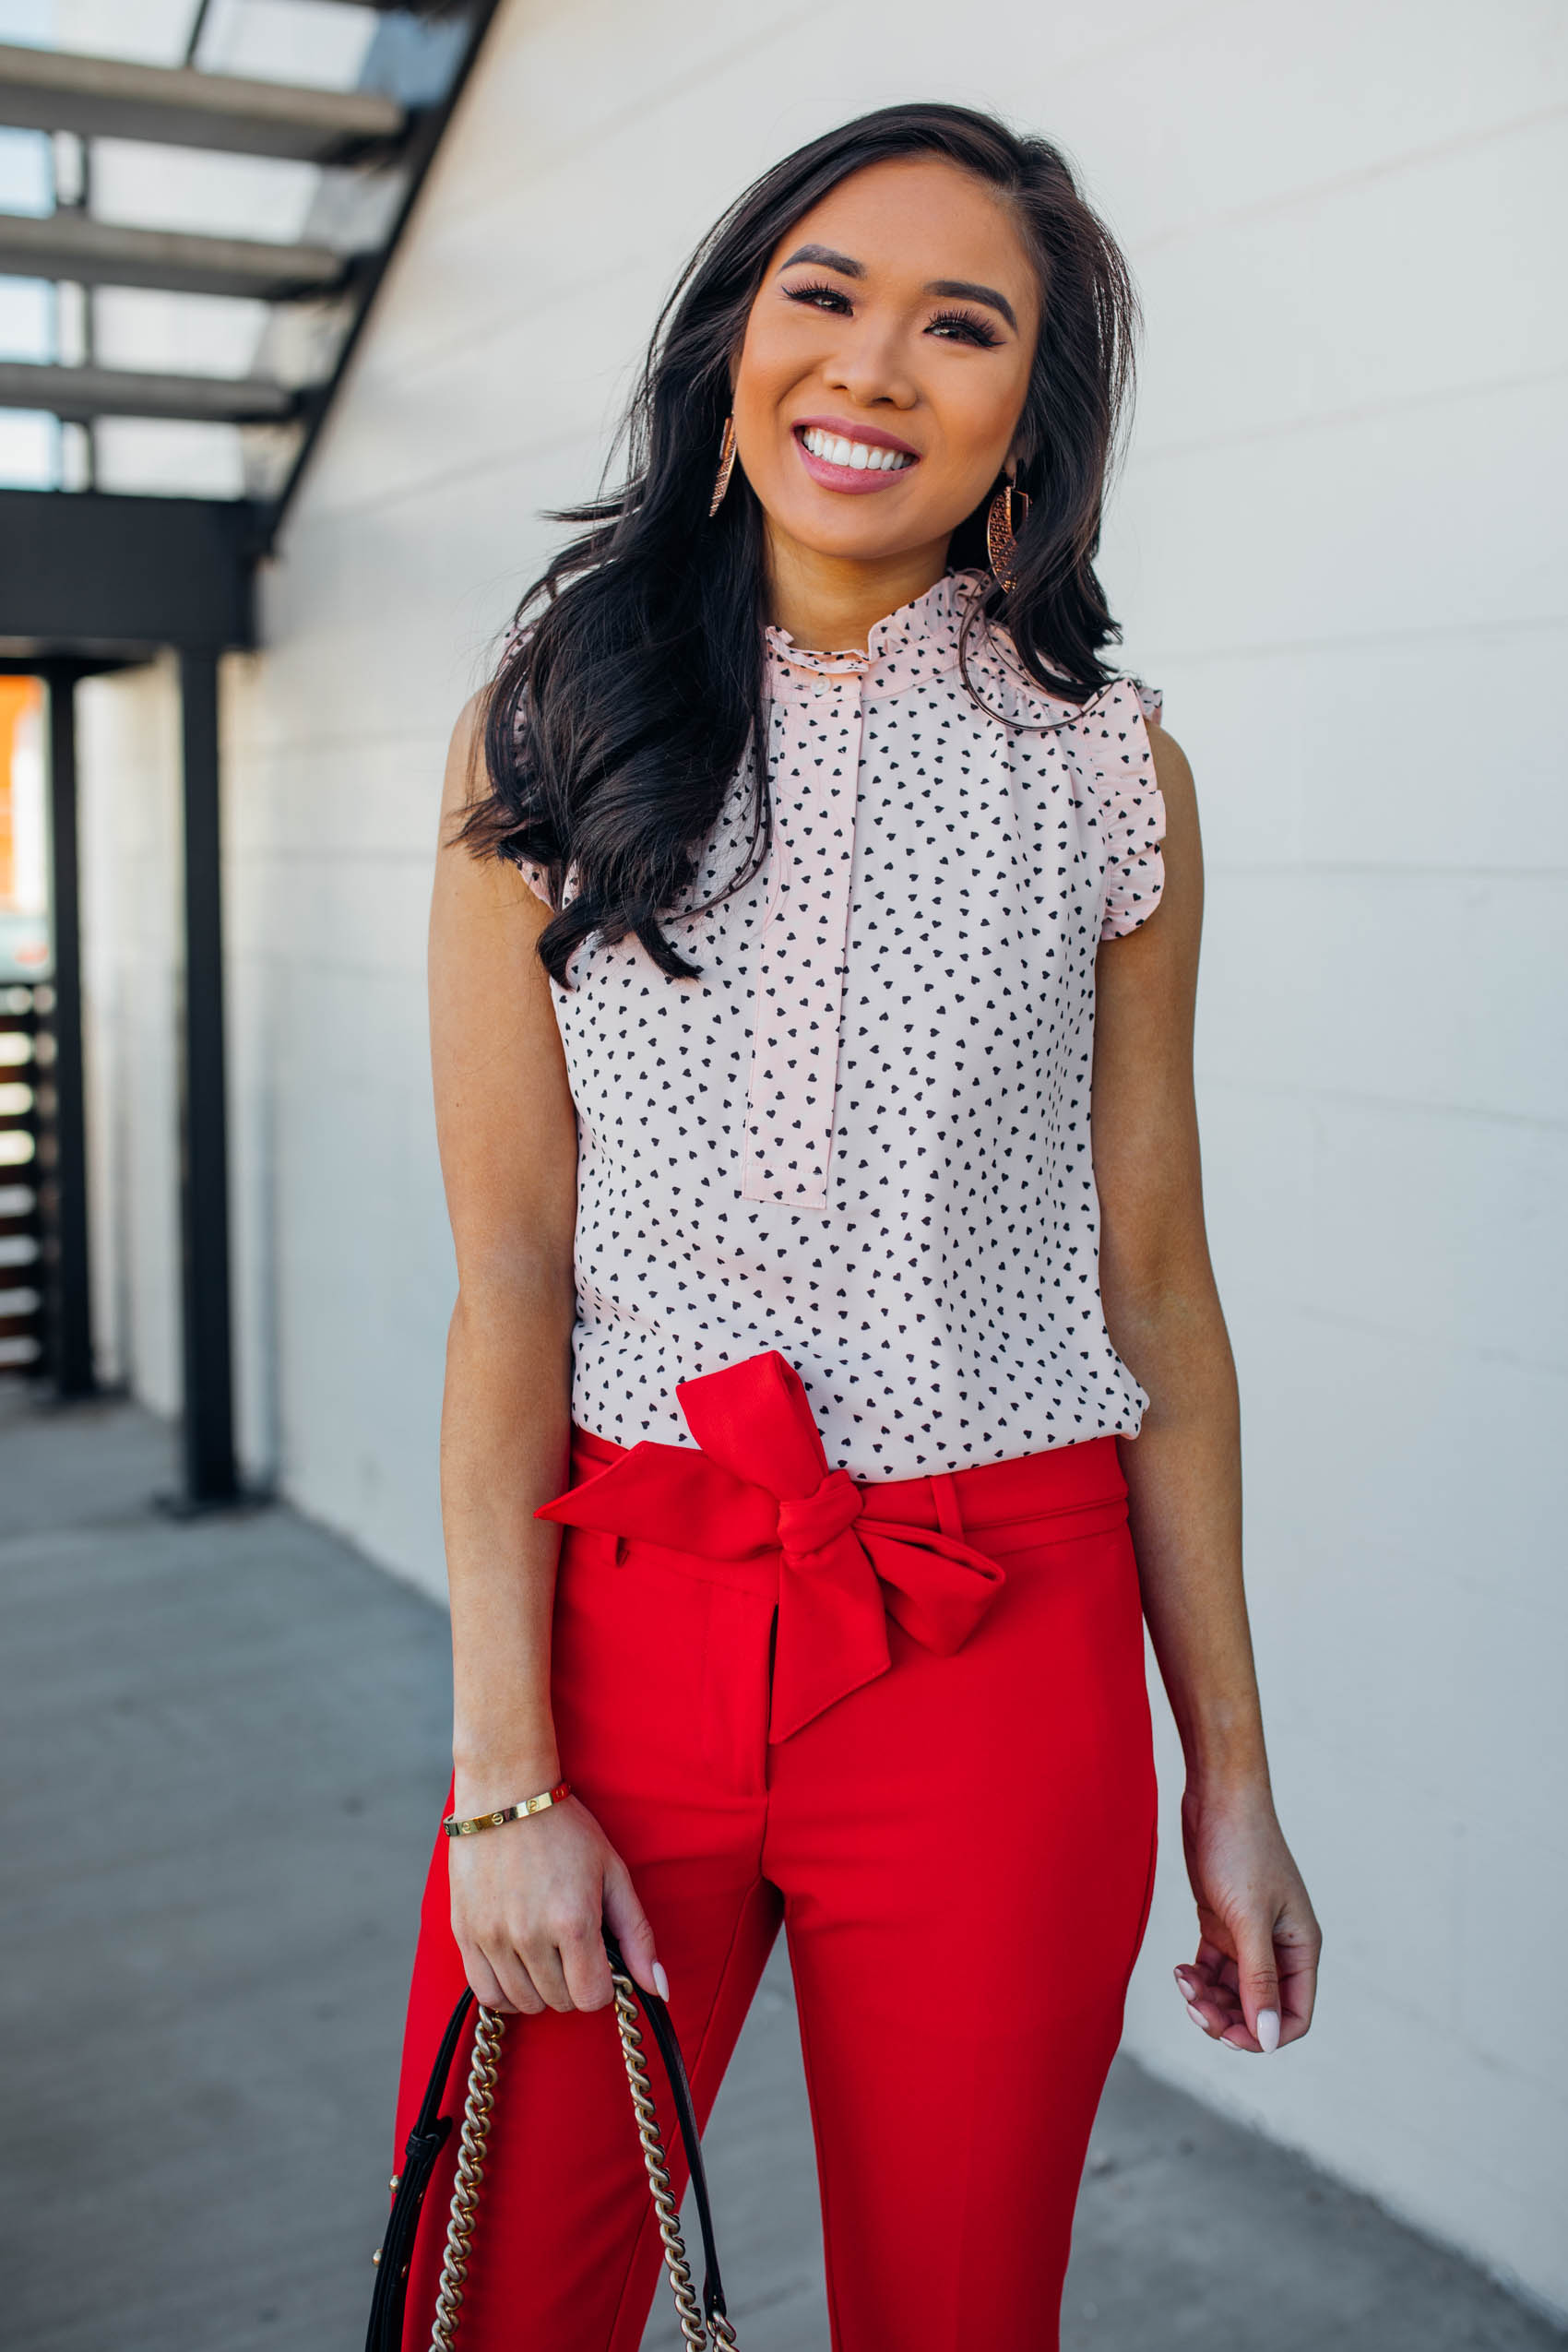 Blogger Hoang-Kim wears a pair of red tie-waist pants for a work outfit